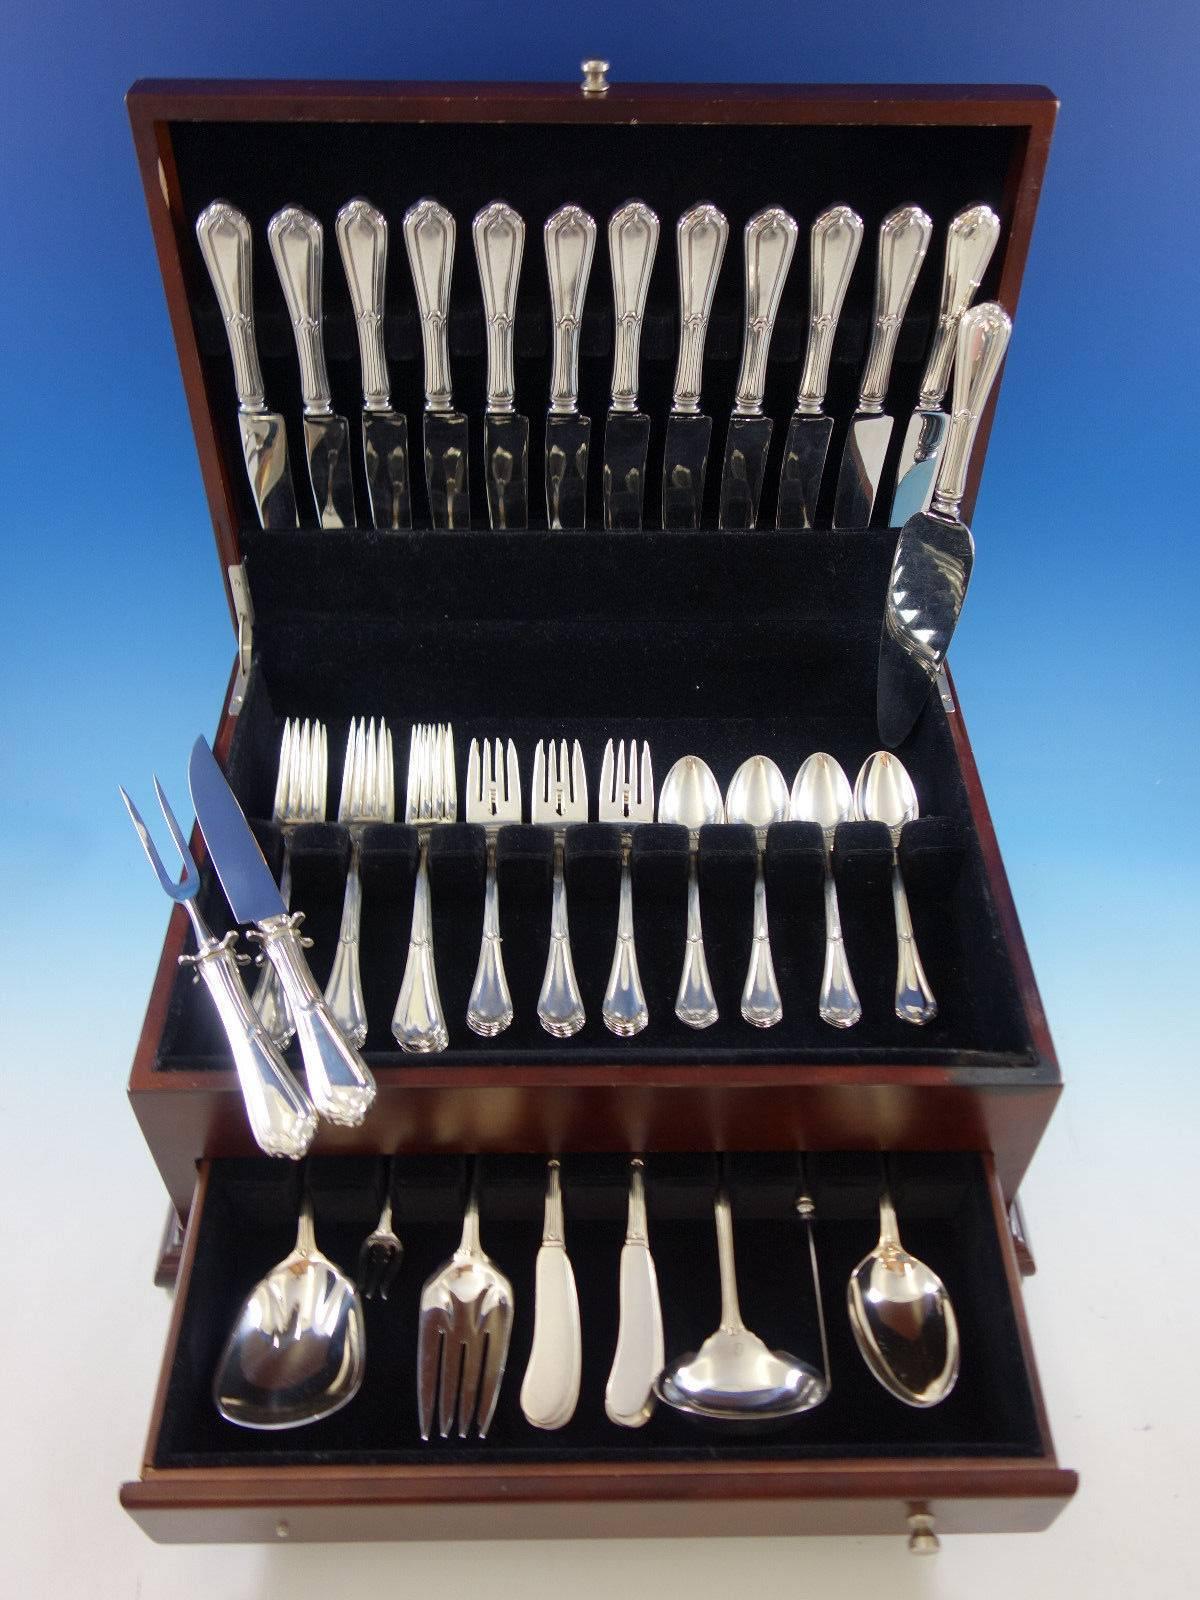 La Salle by Dominick and Haff sterling silver flatware set of 69 pieces. This set includes: 

12 knives, eight 3/4